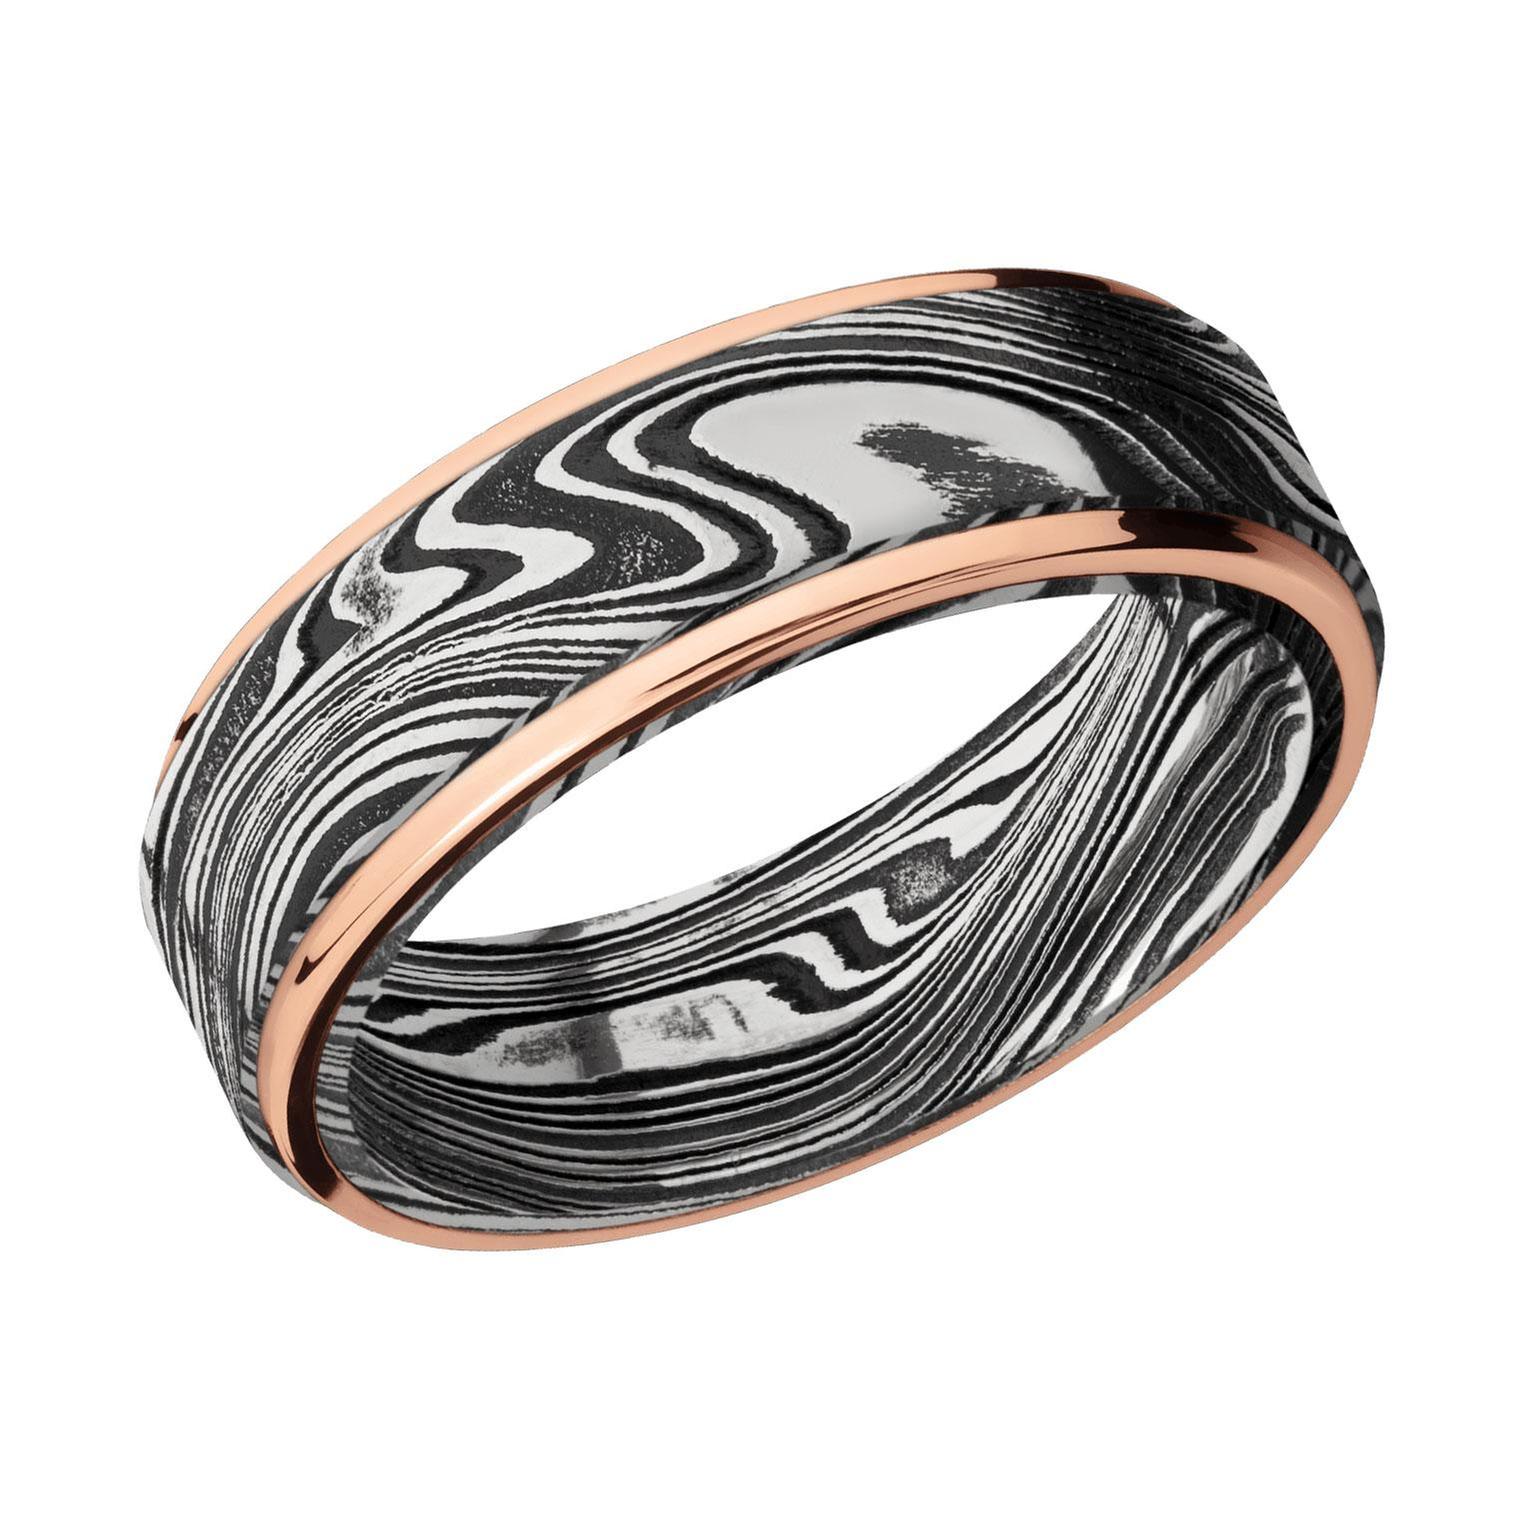 Lashbrook Marble Damascus Steel and Rose Gold Edge Comfort Fit Band, 8mm